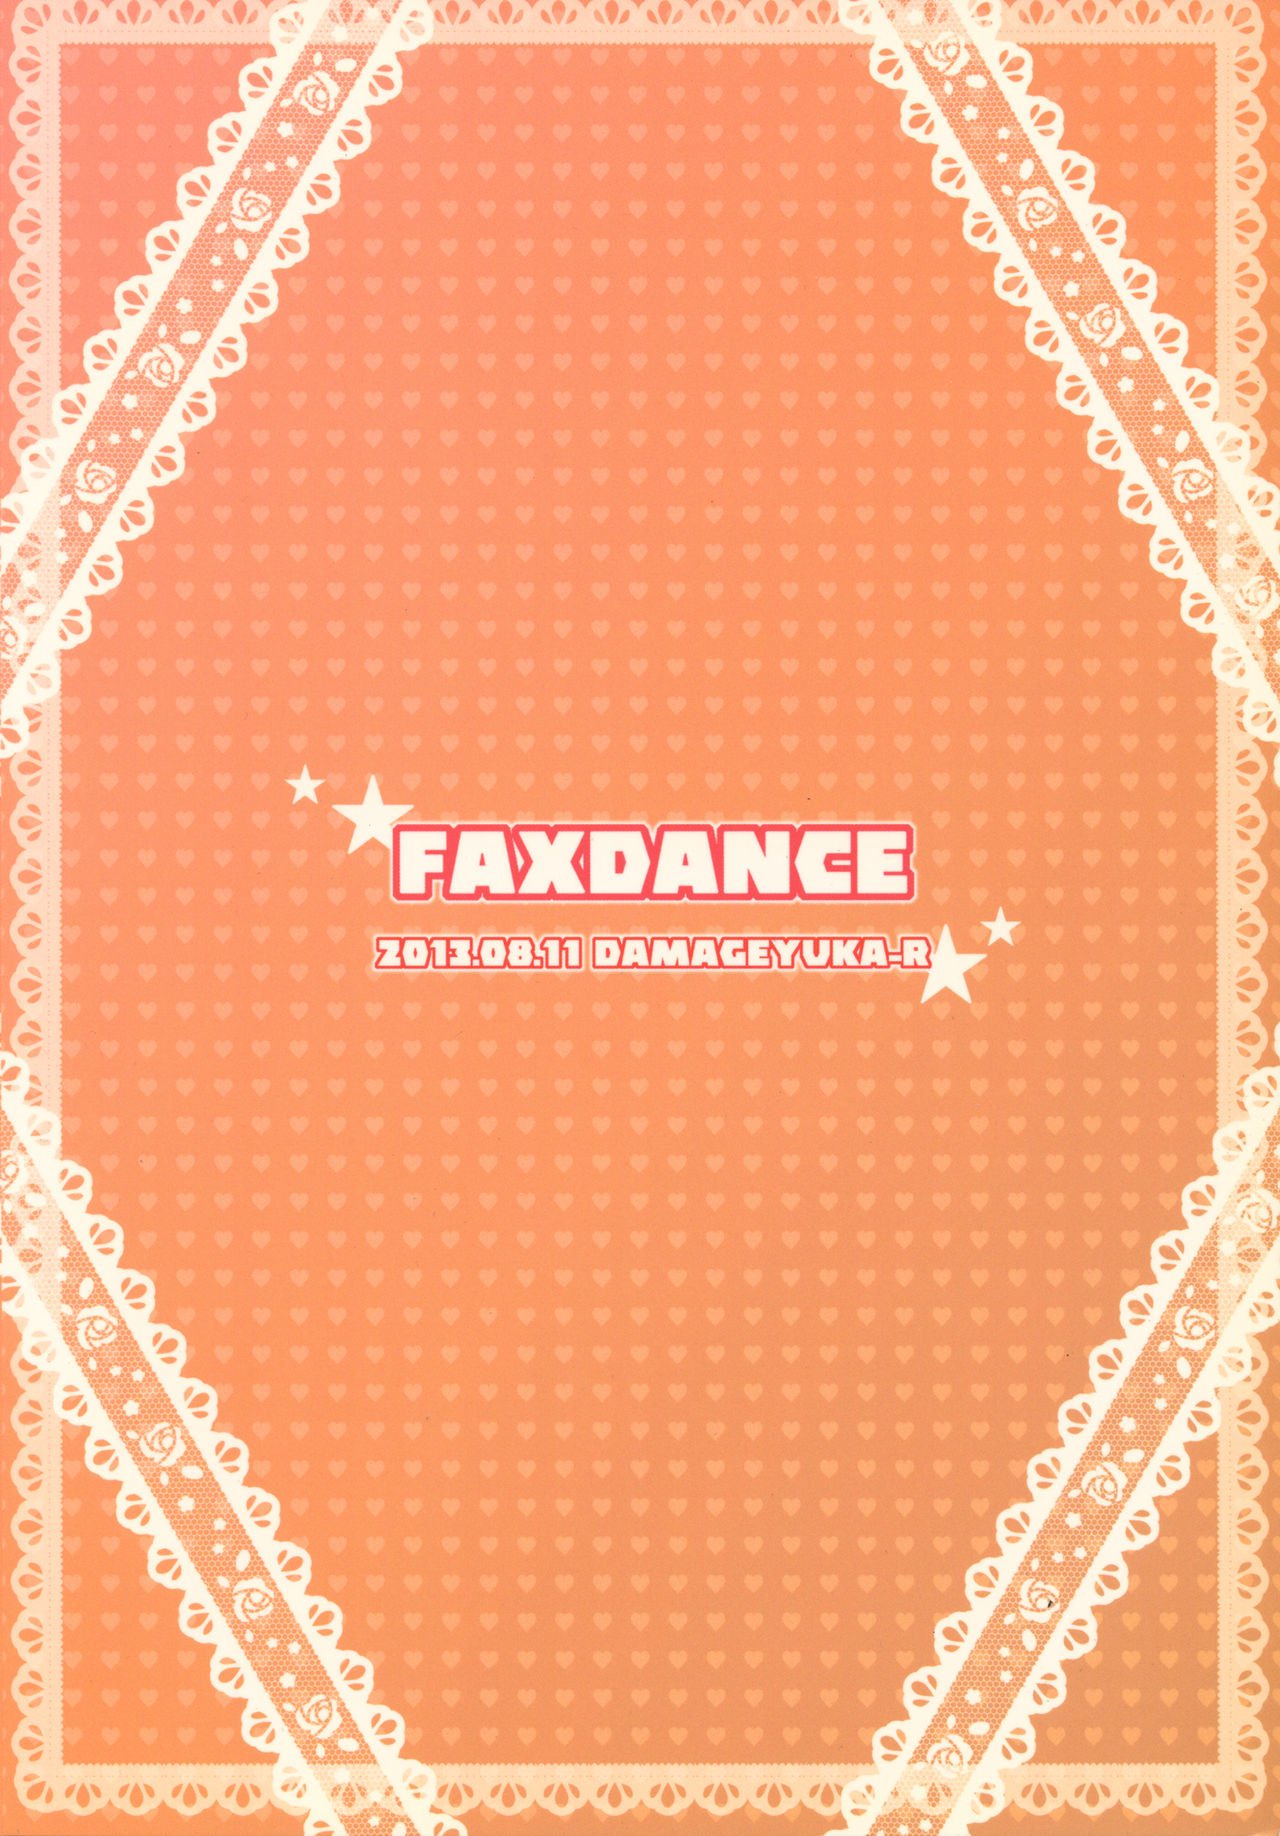 FAXDANCE